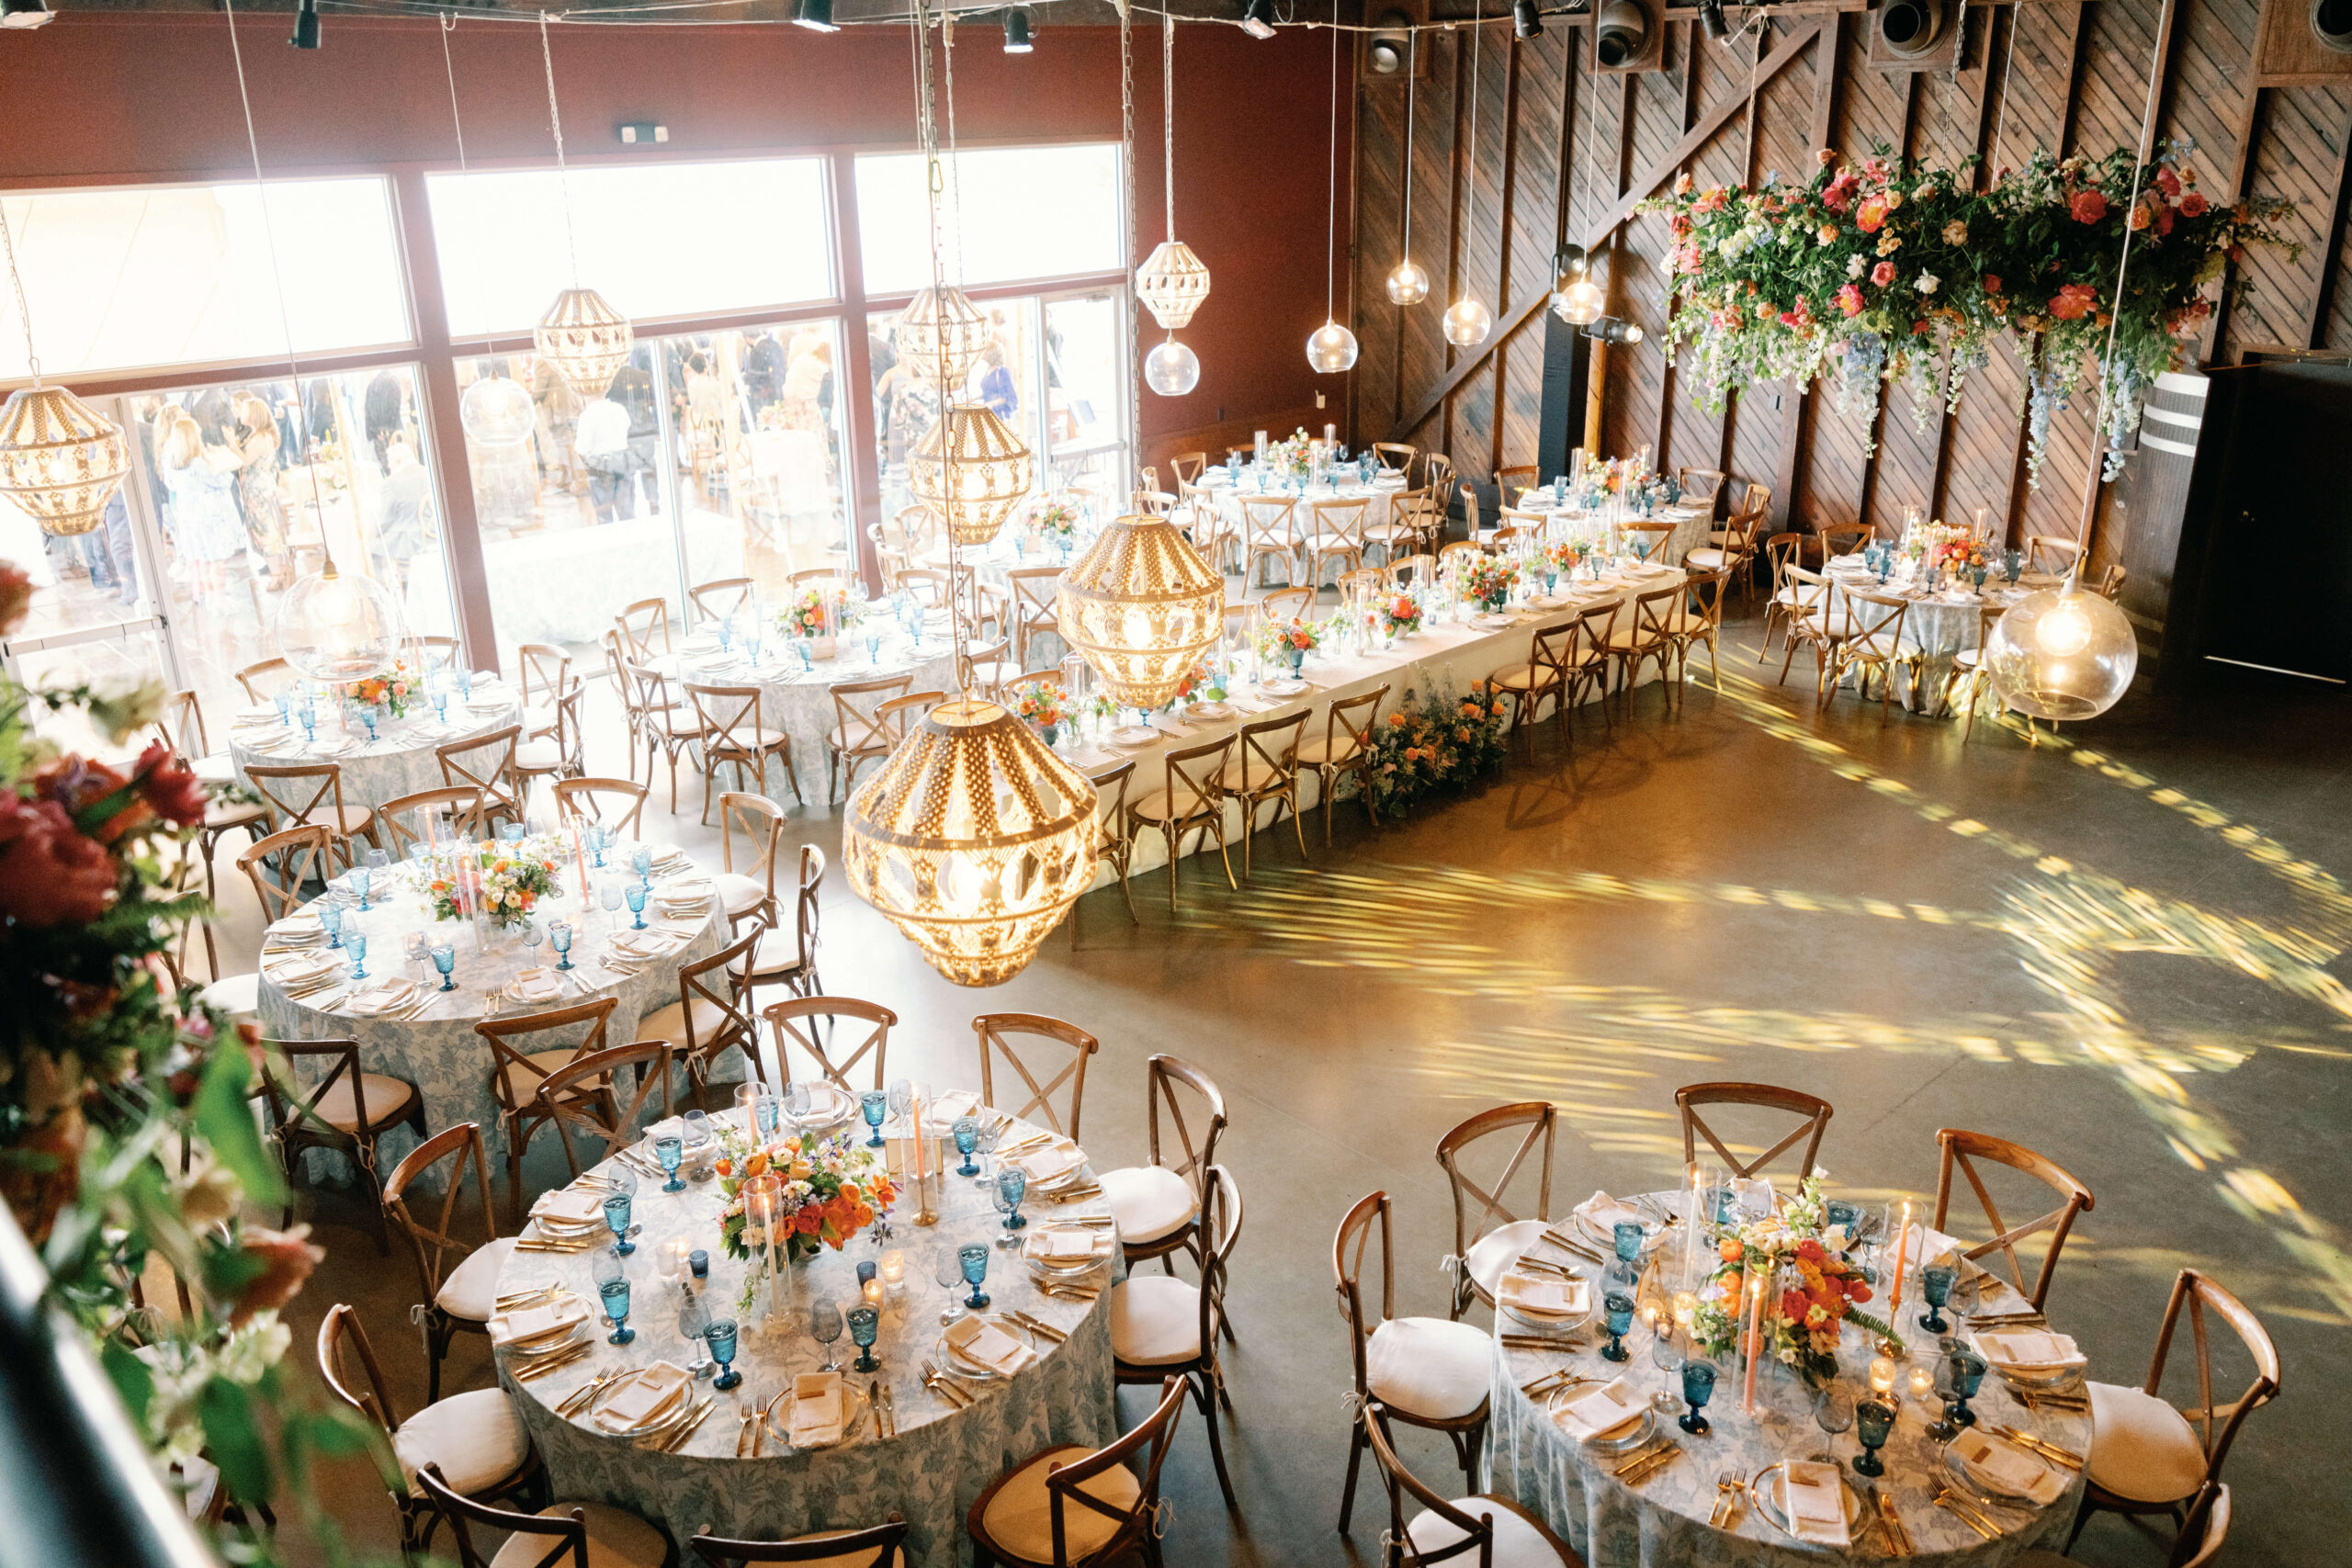 Reception for New England wedding and shoreline vieyard